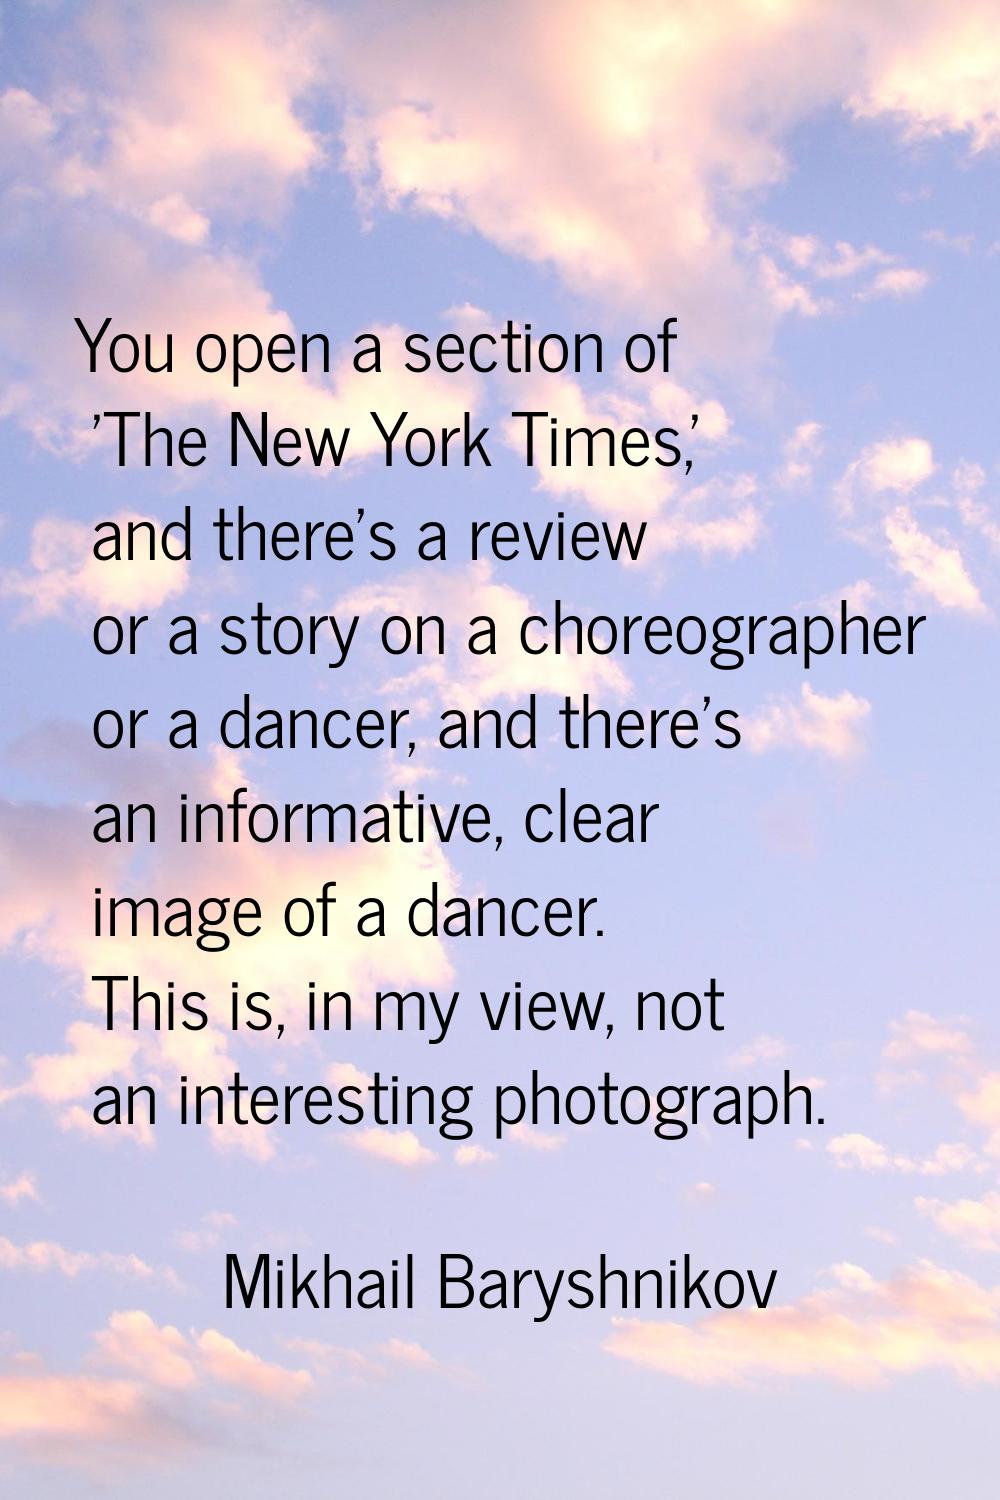 You open a section of 'The New York Times,' and there's a review or a story on a choreographer or a